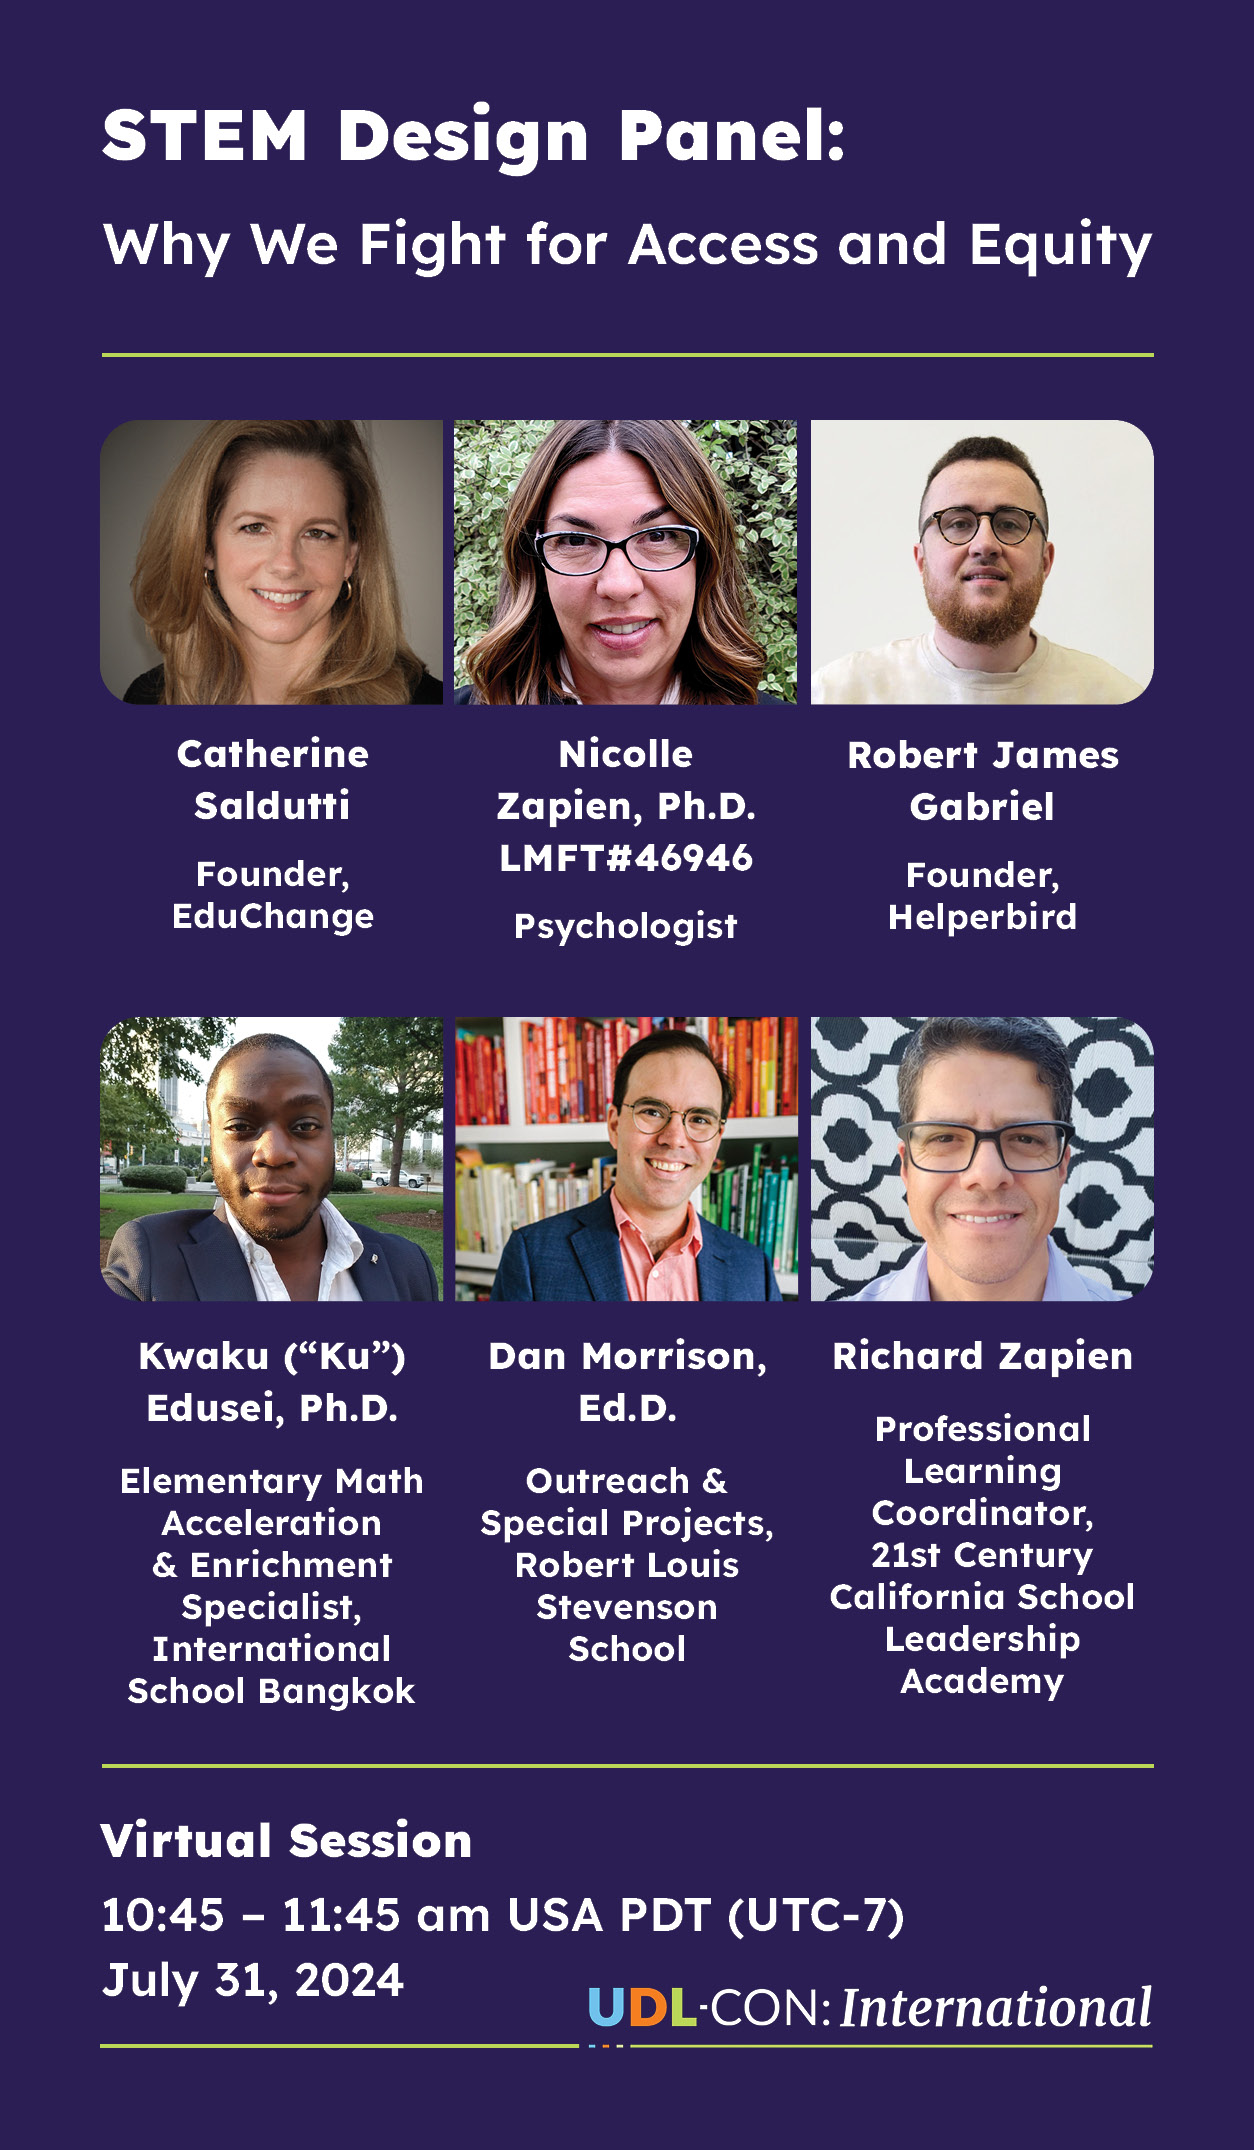 Please join us at UDL-CON on July 31st! We are presenting as a STEM Design Panel: Why We Fight for Access and Equity. A Virtual Session!